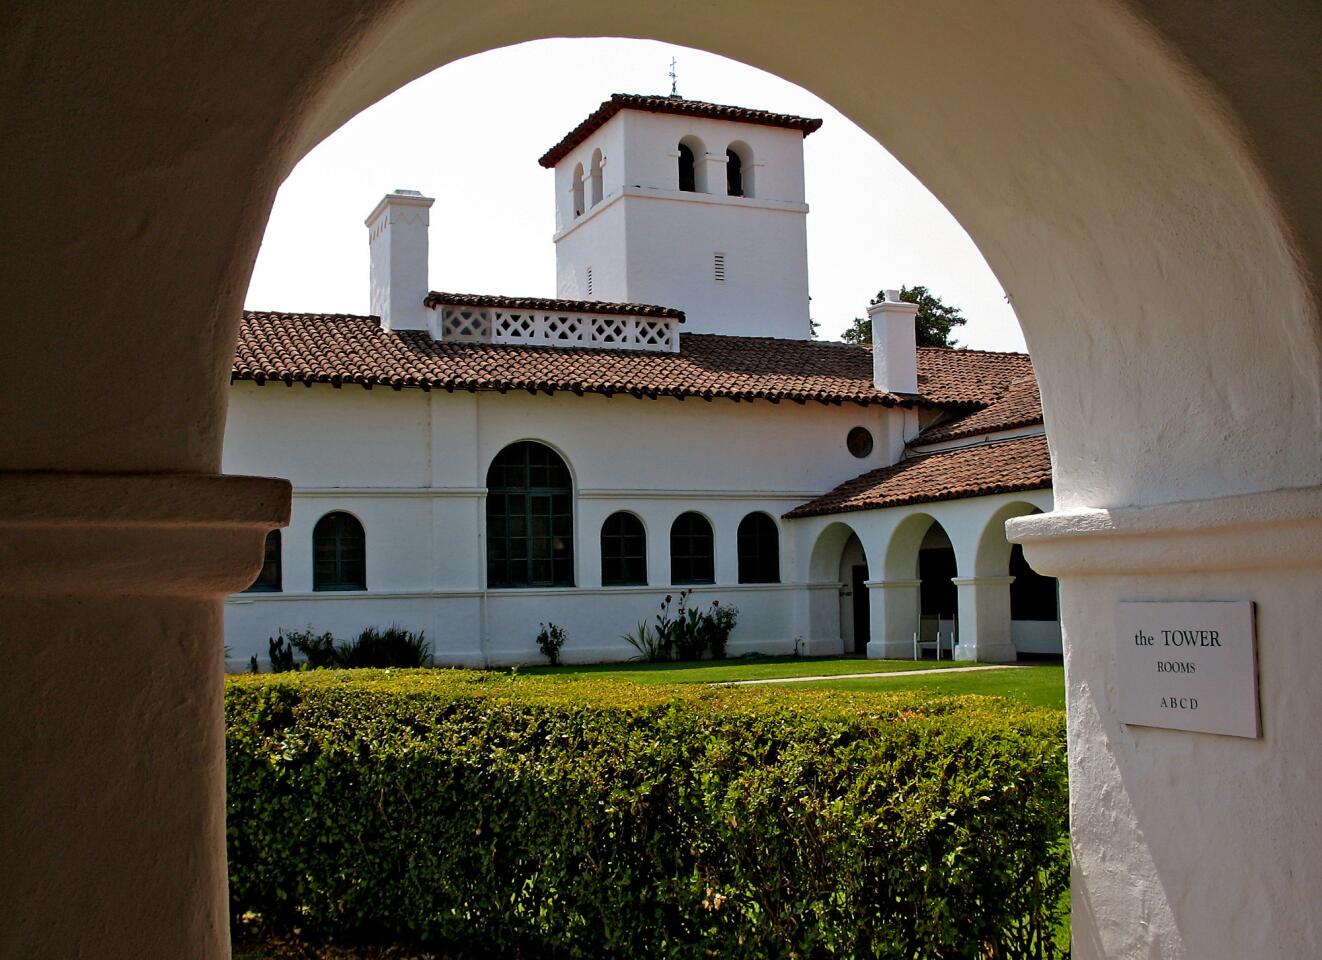 Inspired by California Mission and Spanish colonial styles, the complex once served mainly as headquarters for William Randolph Hearst's Milpitas ranch staff. Its now part of Ft. Hunter Liggett, an Army facility in the central part of the state. Visitors can stay the night there.